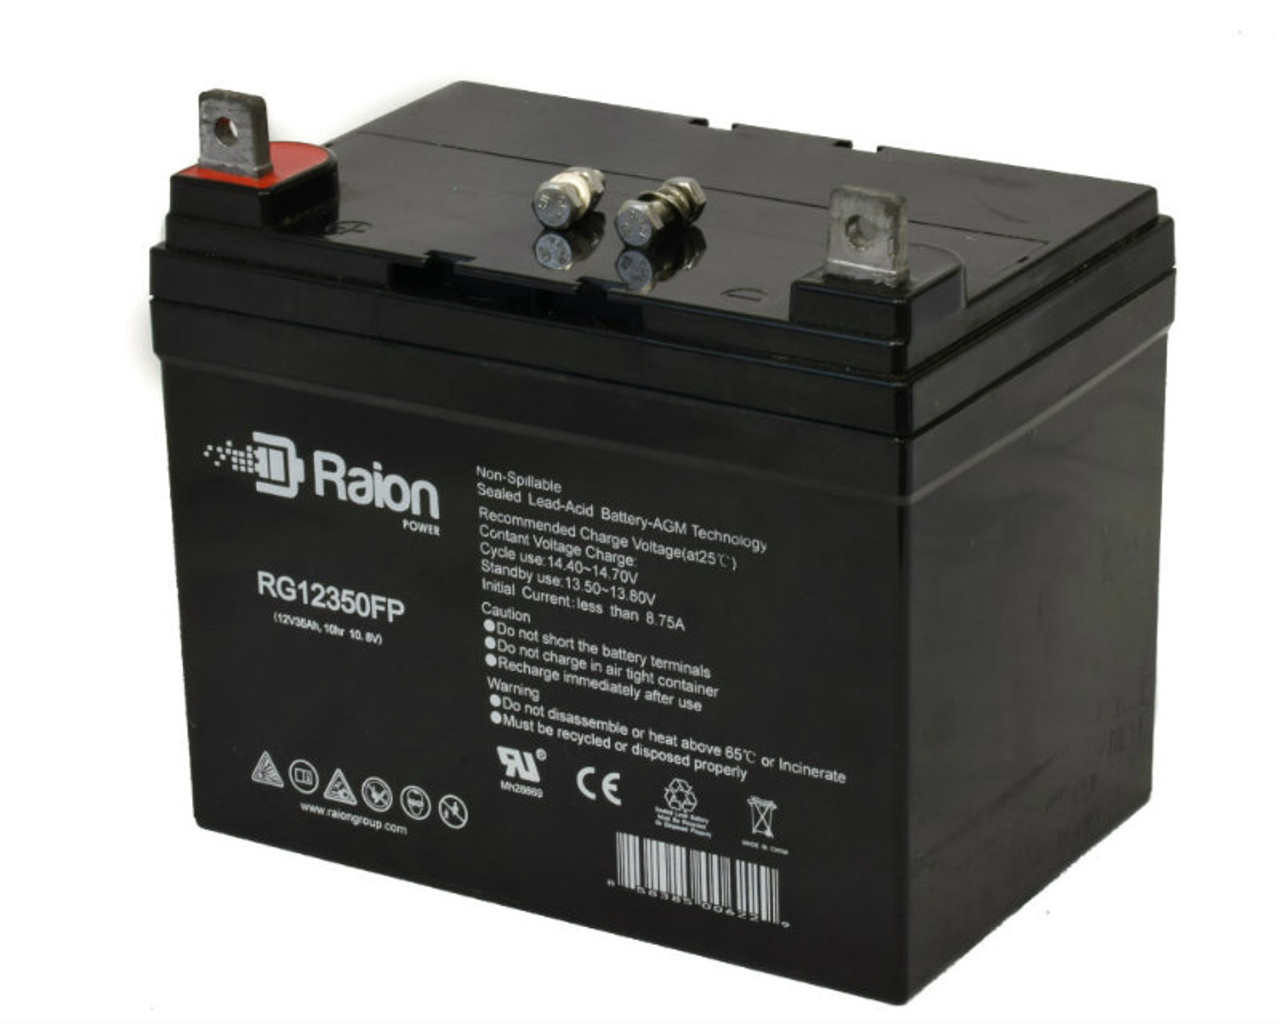 Raion Power Replacement 12V 35Ah RG12350FP Battery for Bobcat by Textron BZT12000